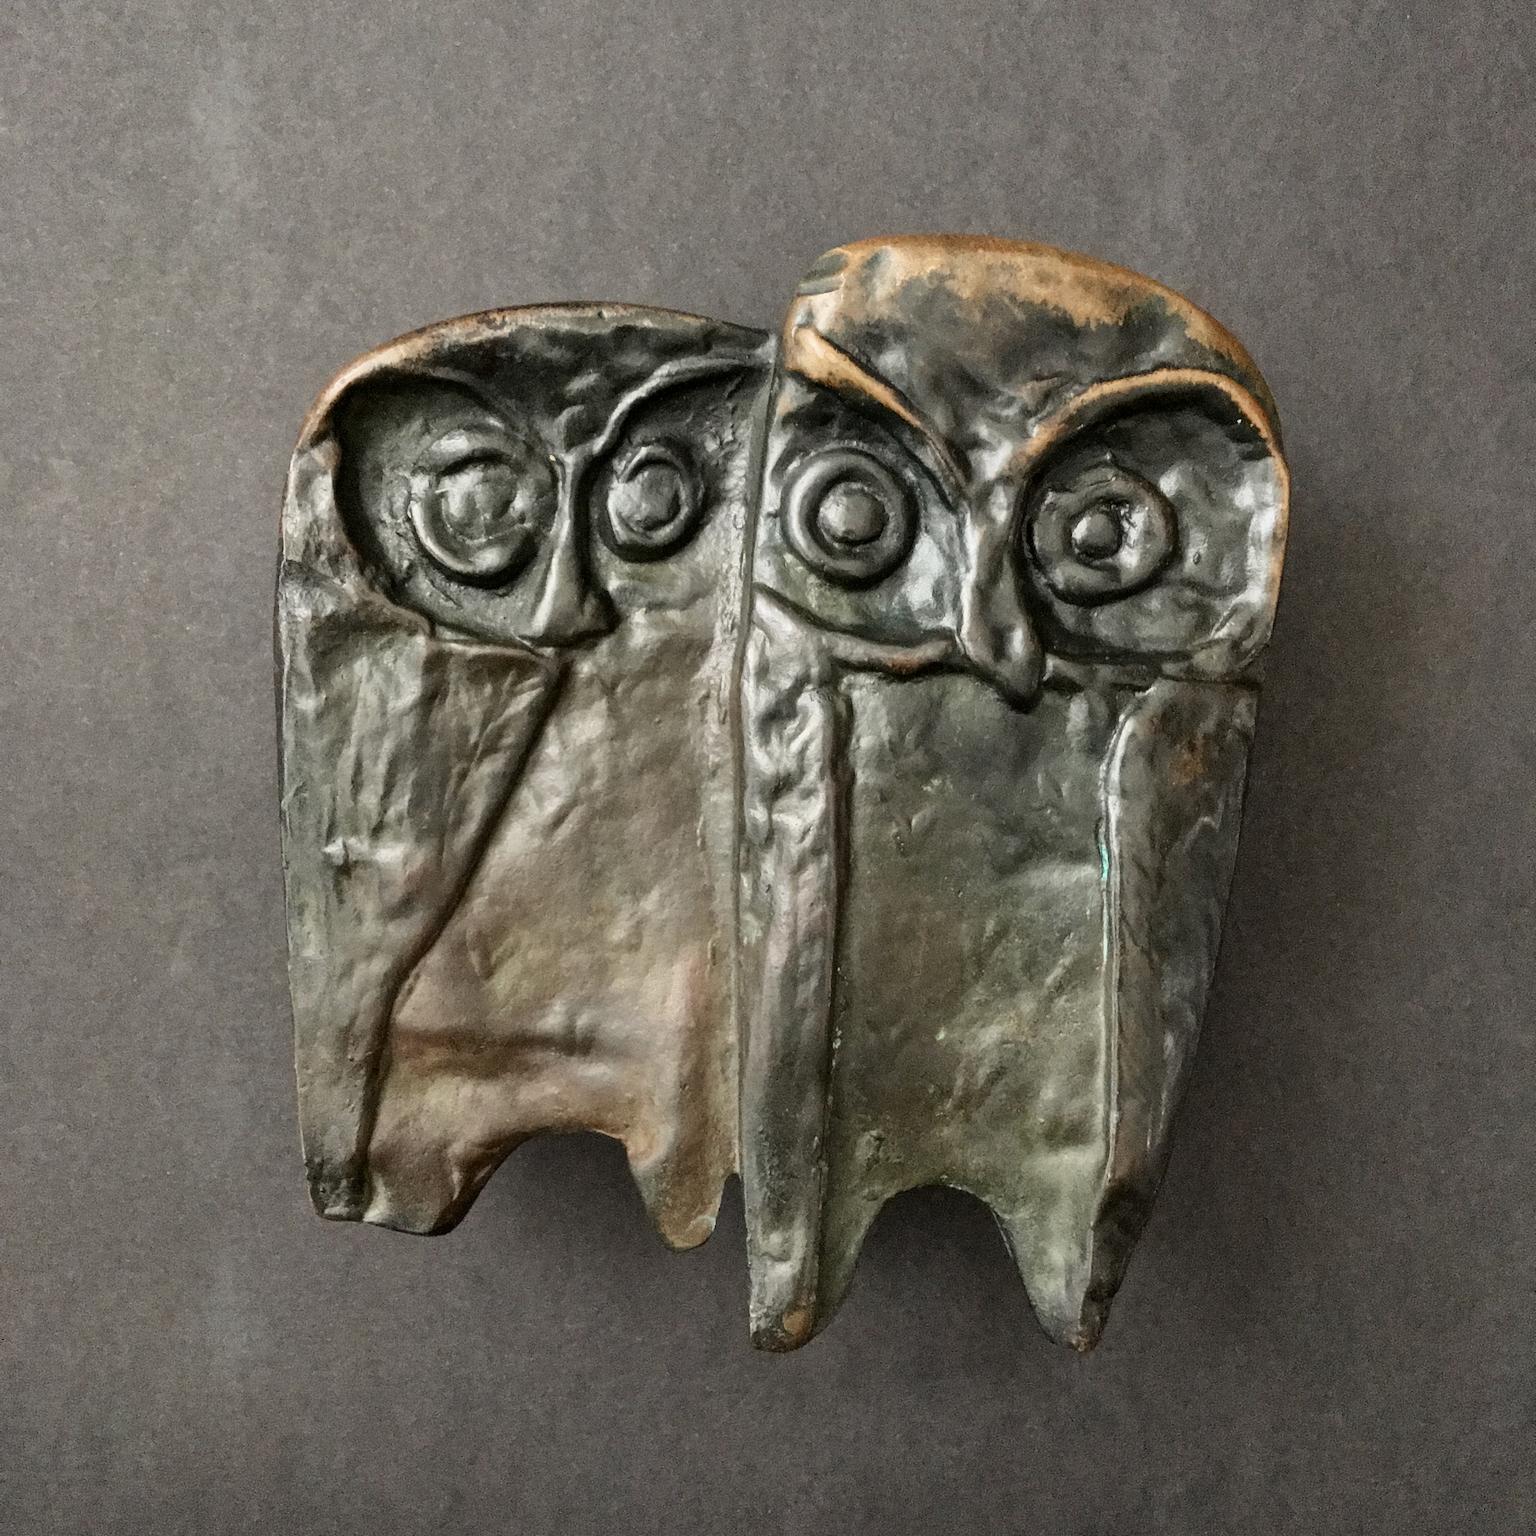 A bronze push or pull door handle, with owl design, mid-late 20th century, European.

This is a heavy piece, made of cast bronze with an owl design. We have not cleaned or polished this piece and it is offered as found. The metal has very nice